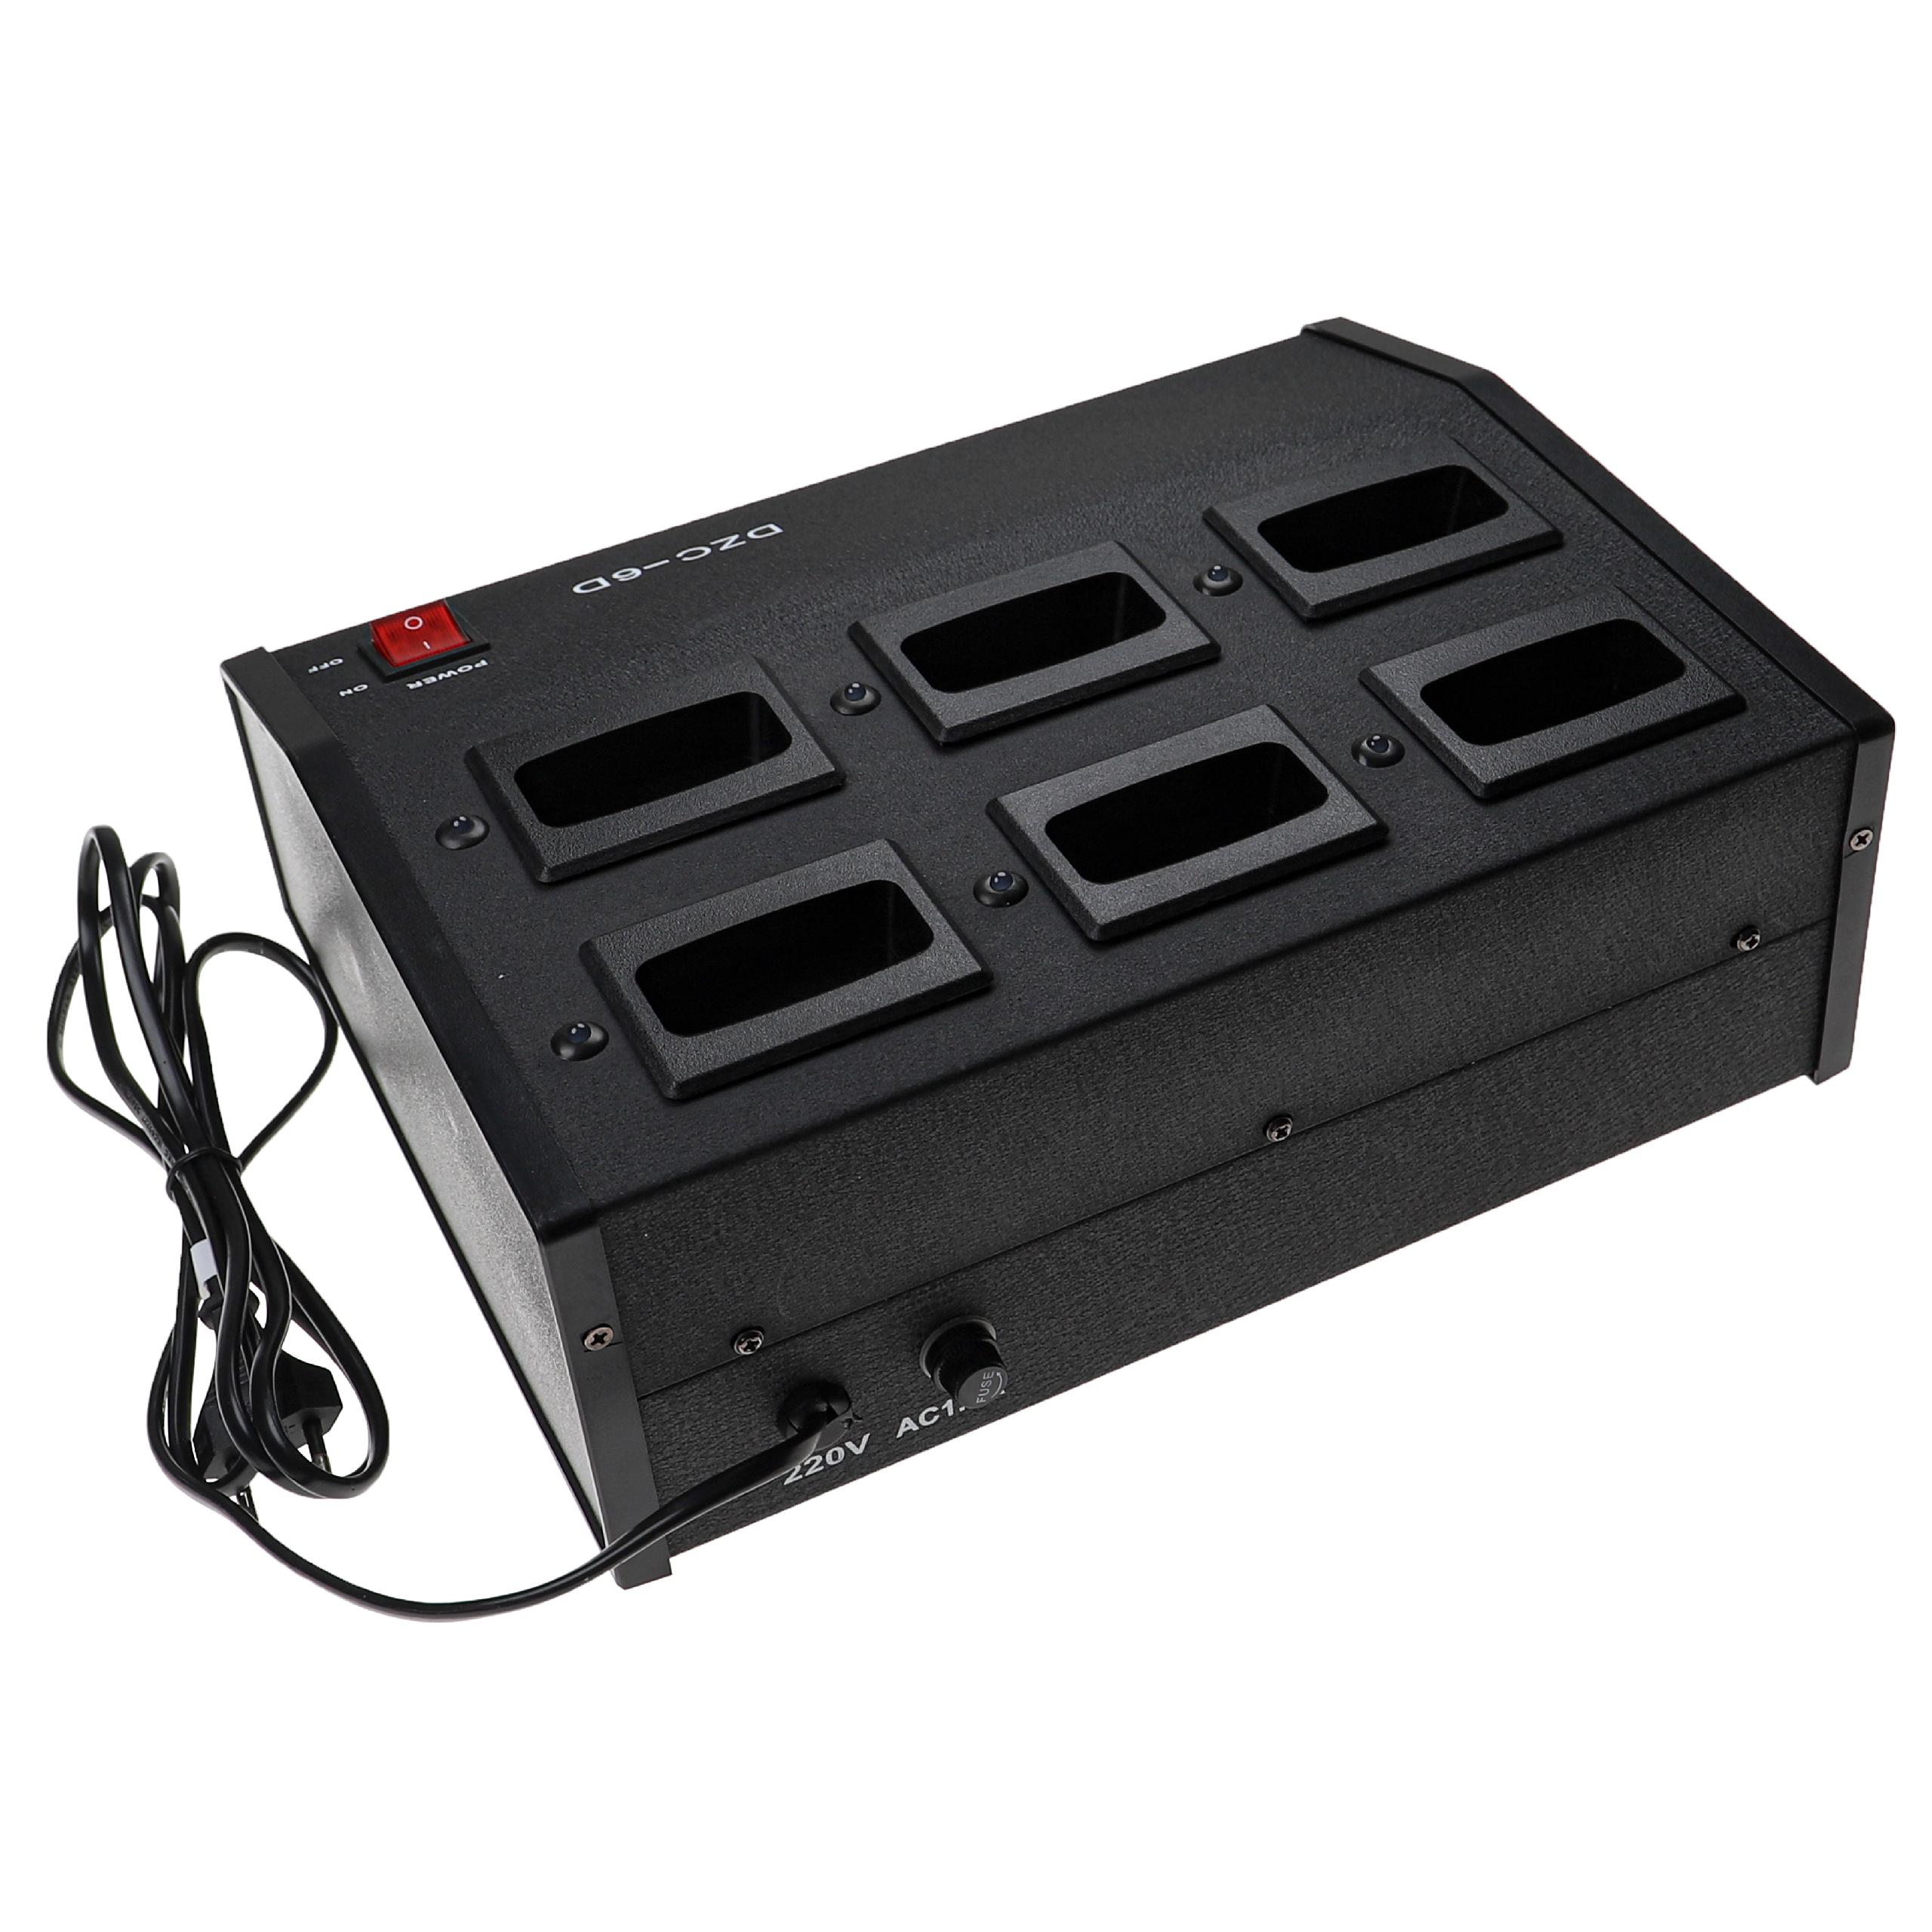 Charger Suitable for TH-22E Radio Batteries - 15 V, 7 A